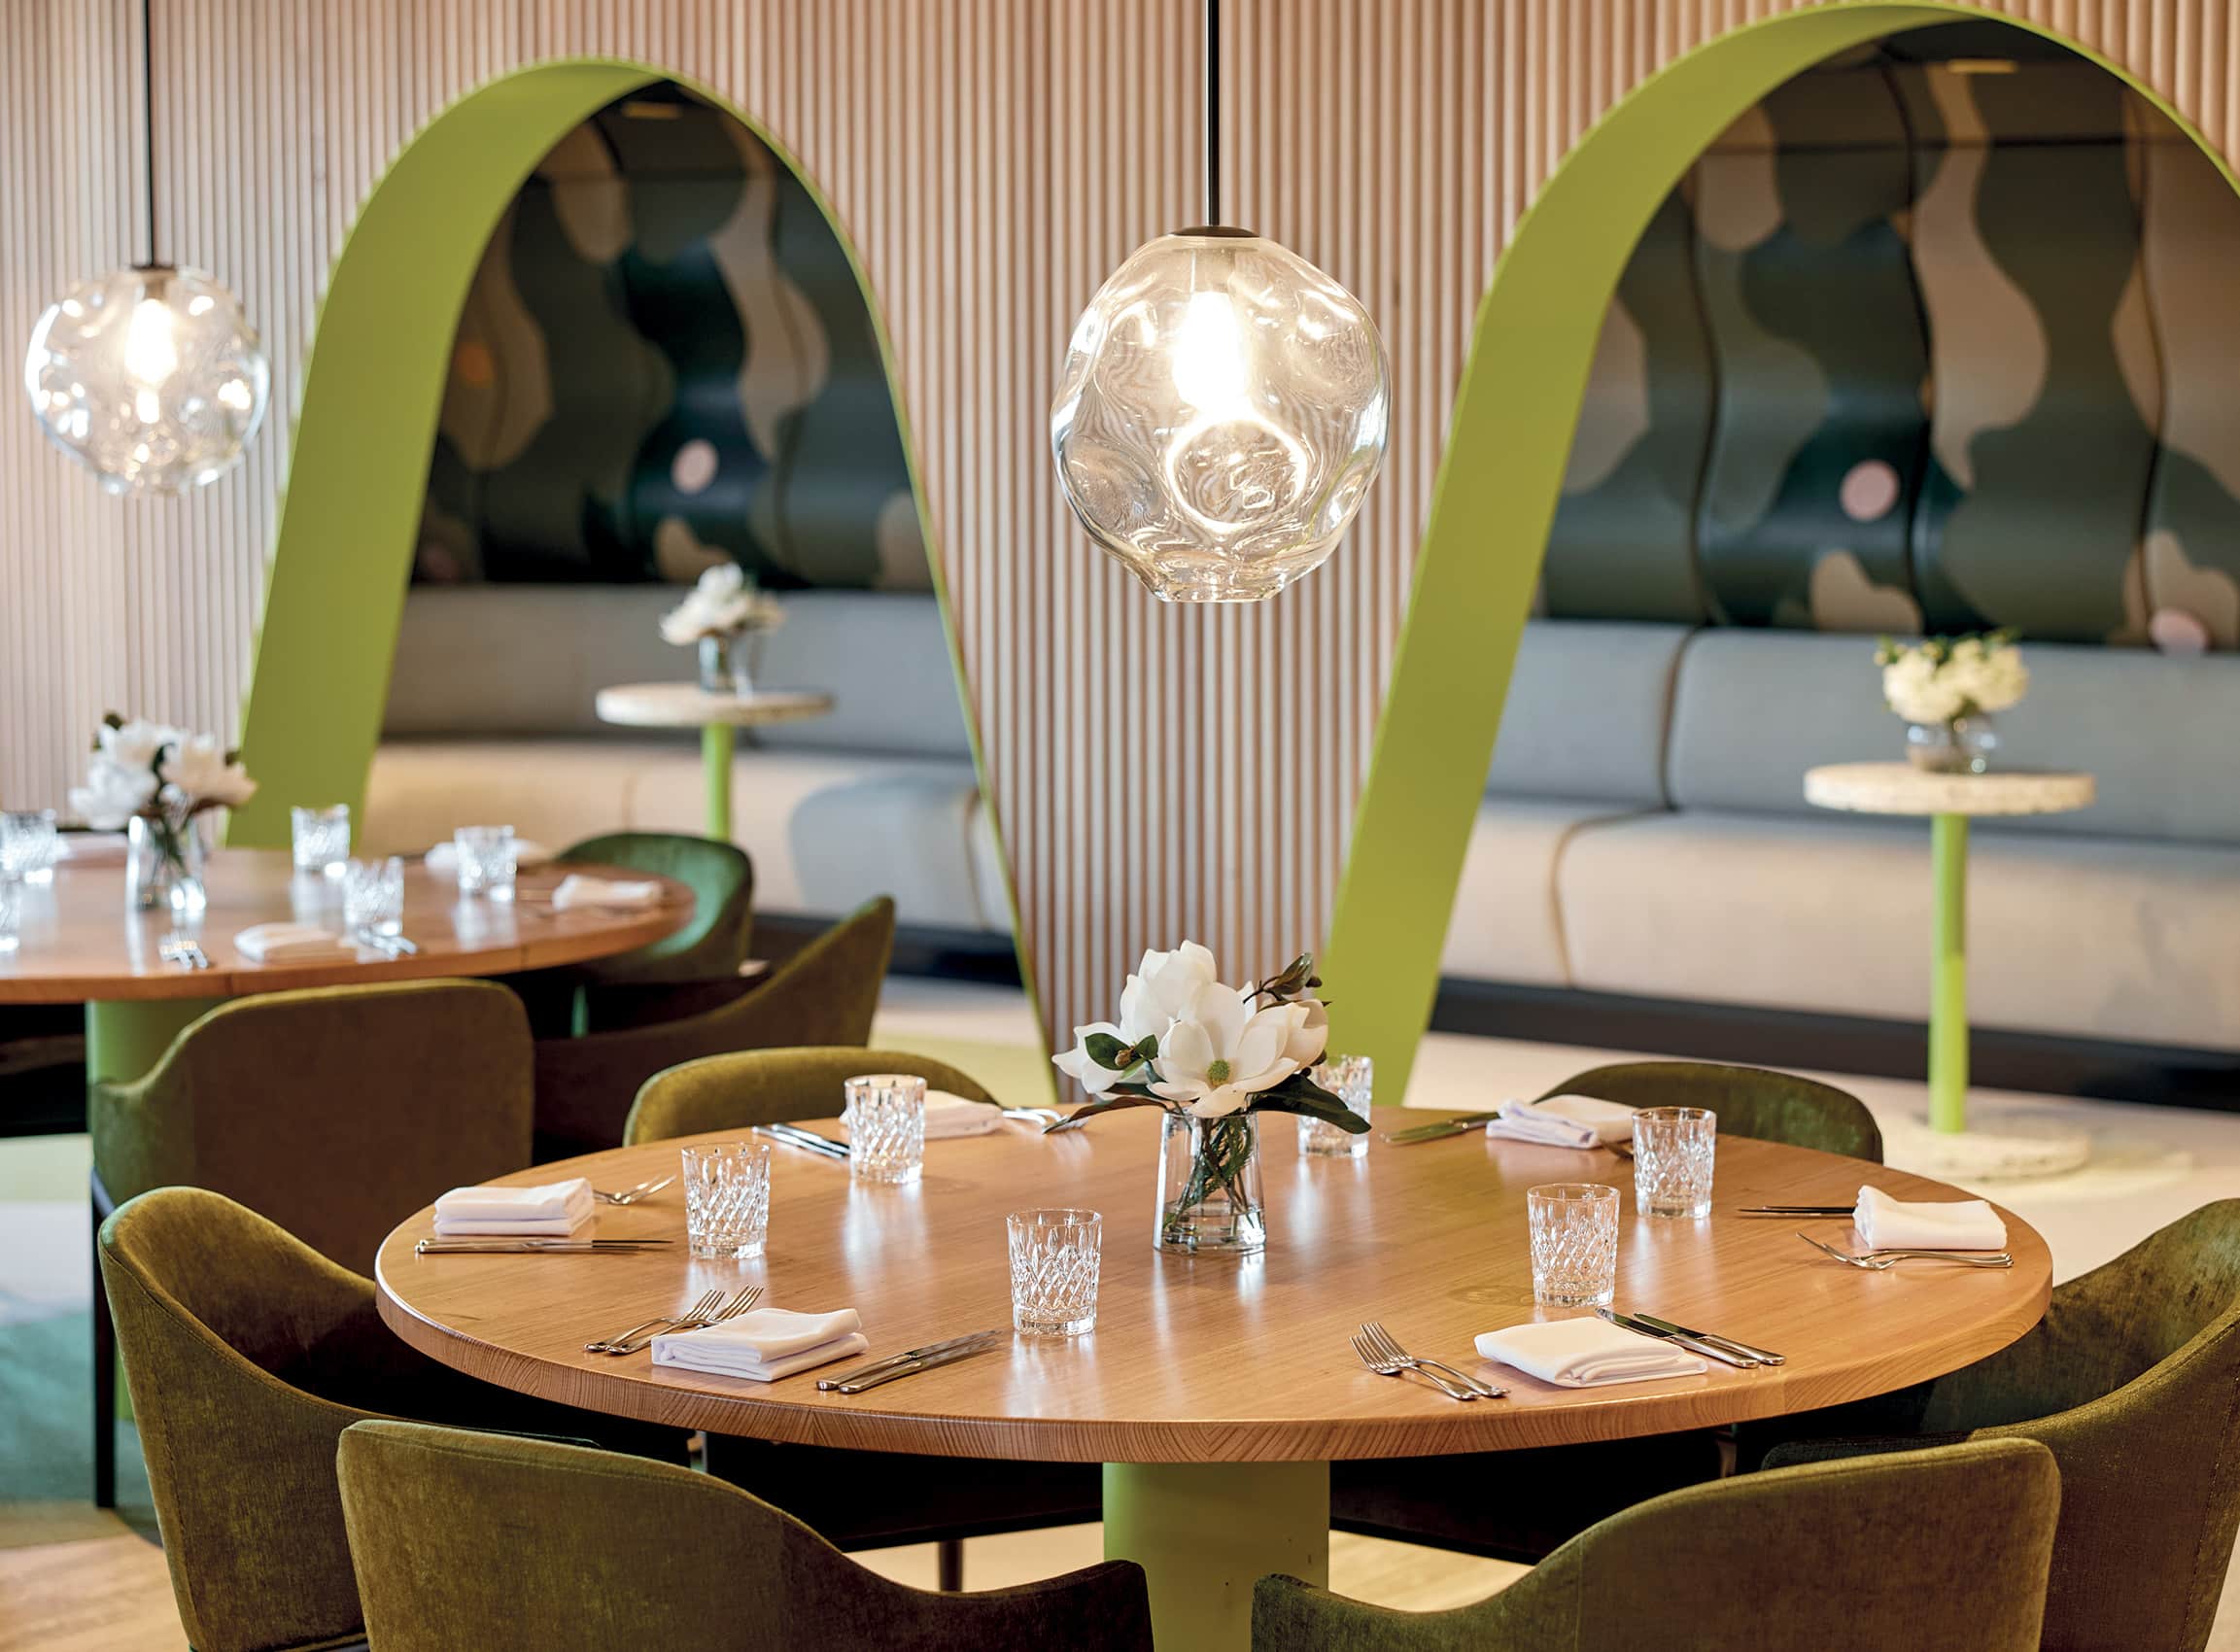 Head up to 15th floor and let every sense be awakened at The Alba restaurant.